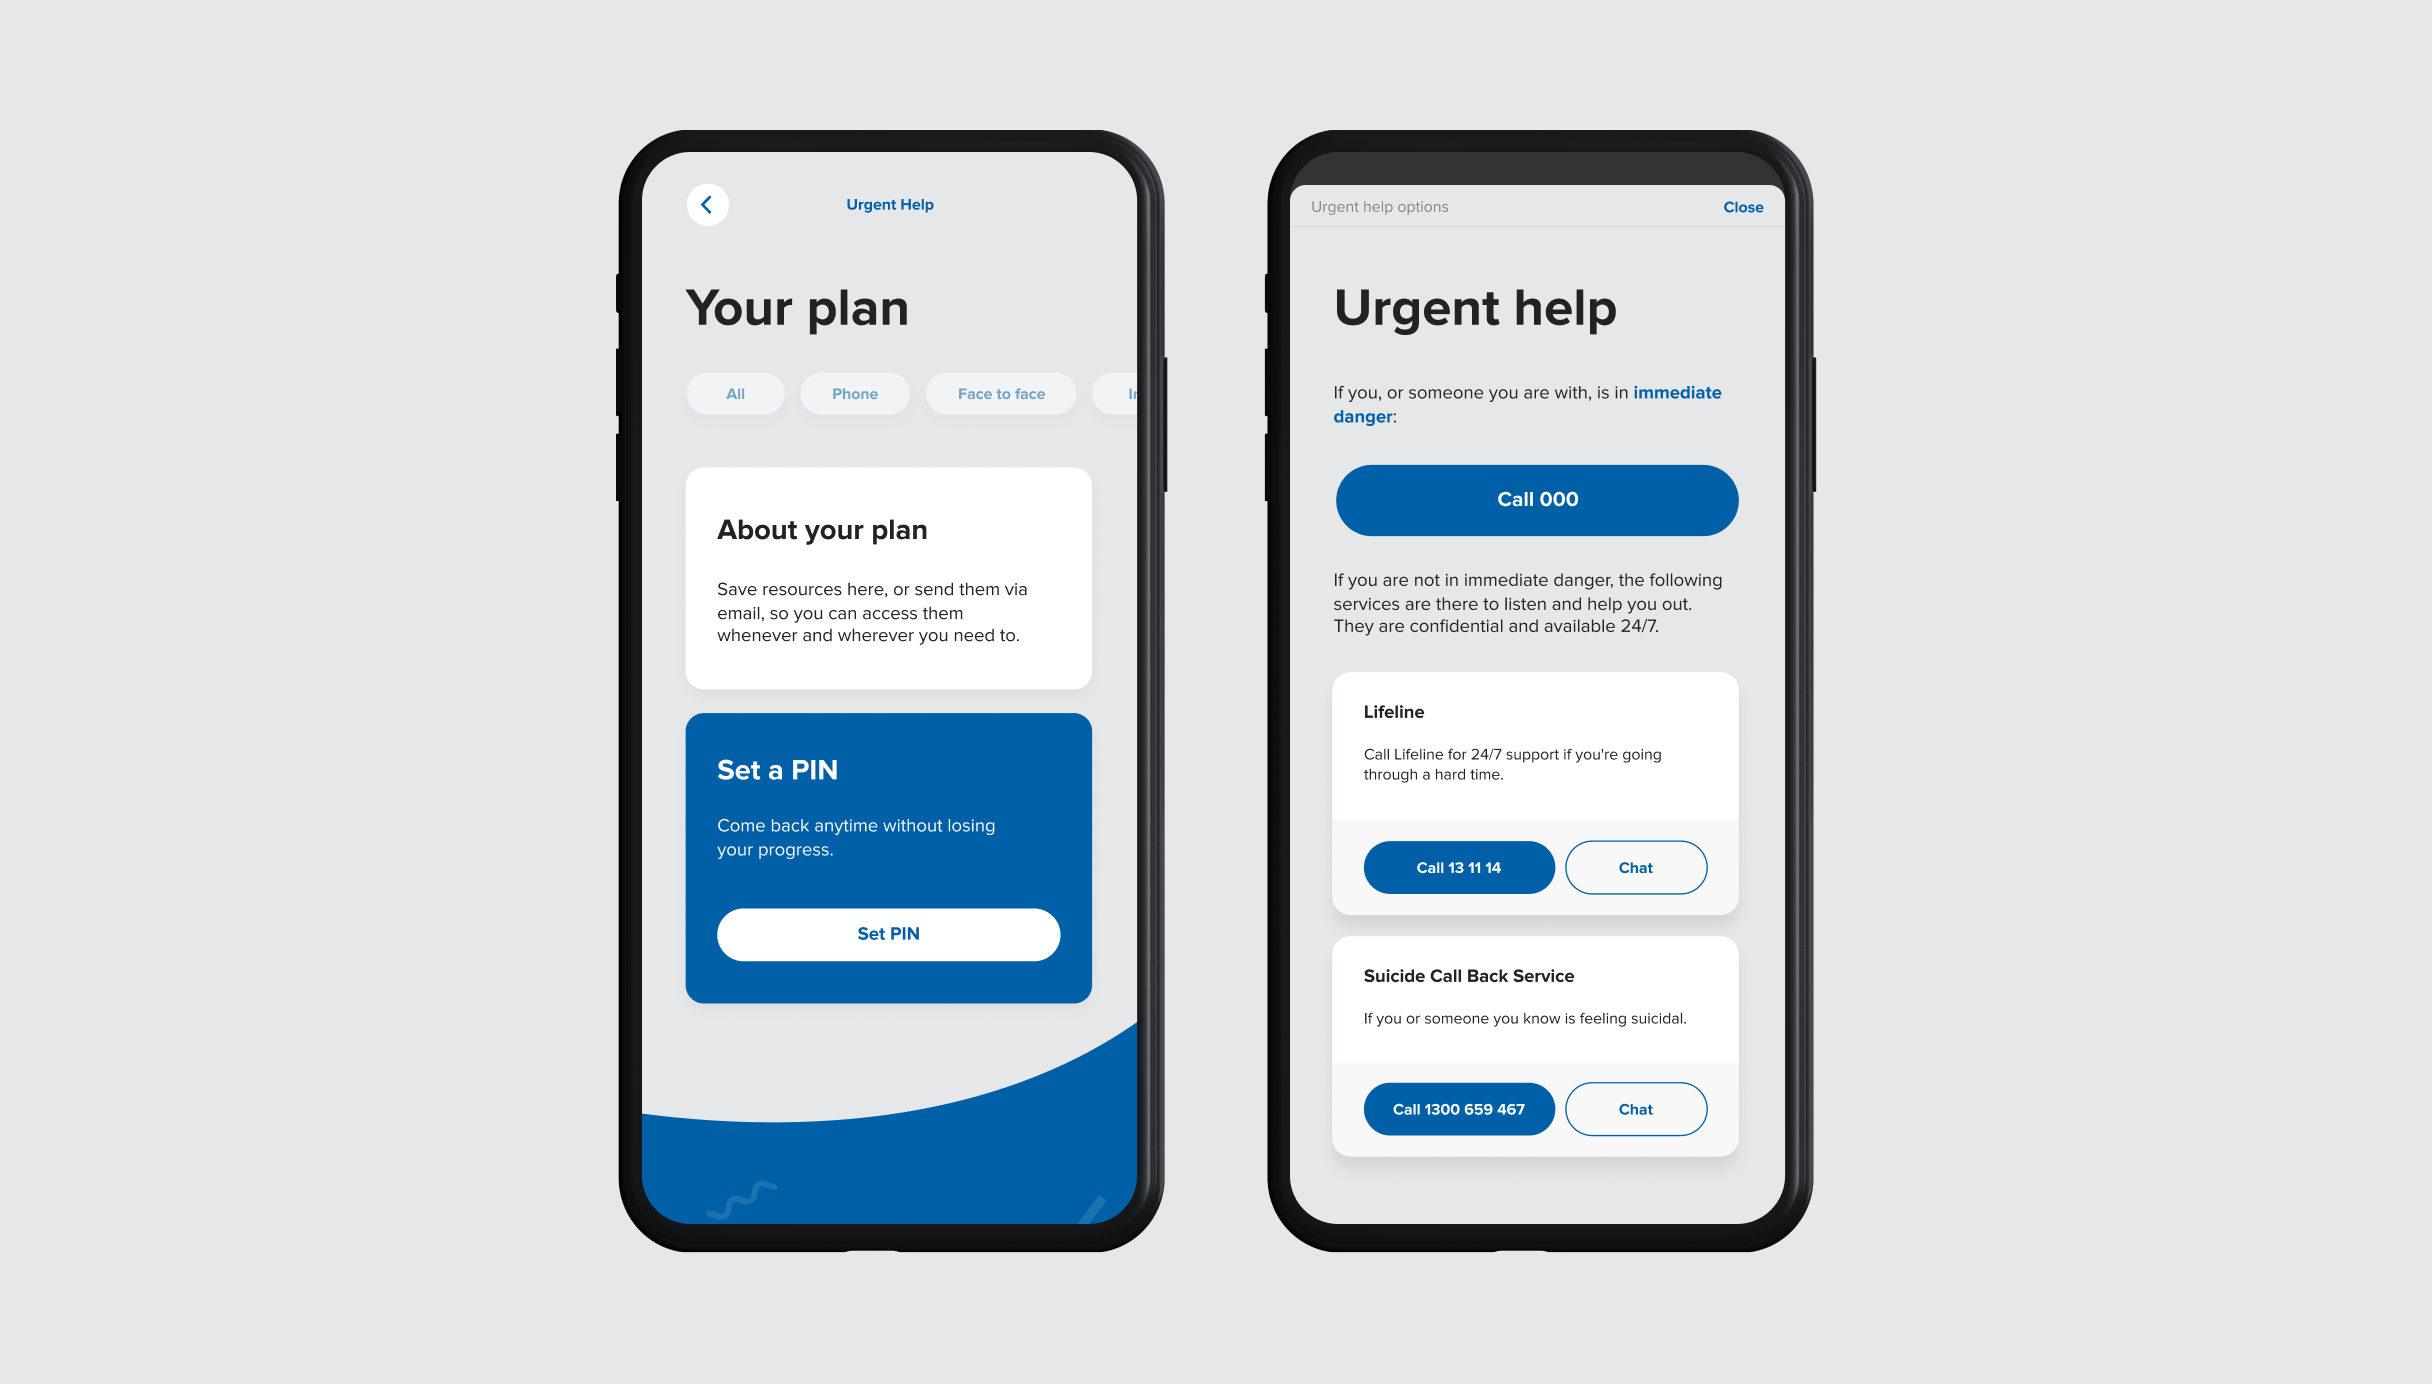 Mobile Next Step your plan and urgent help screens